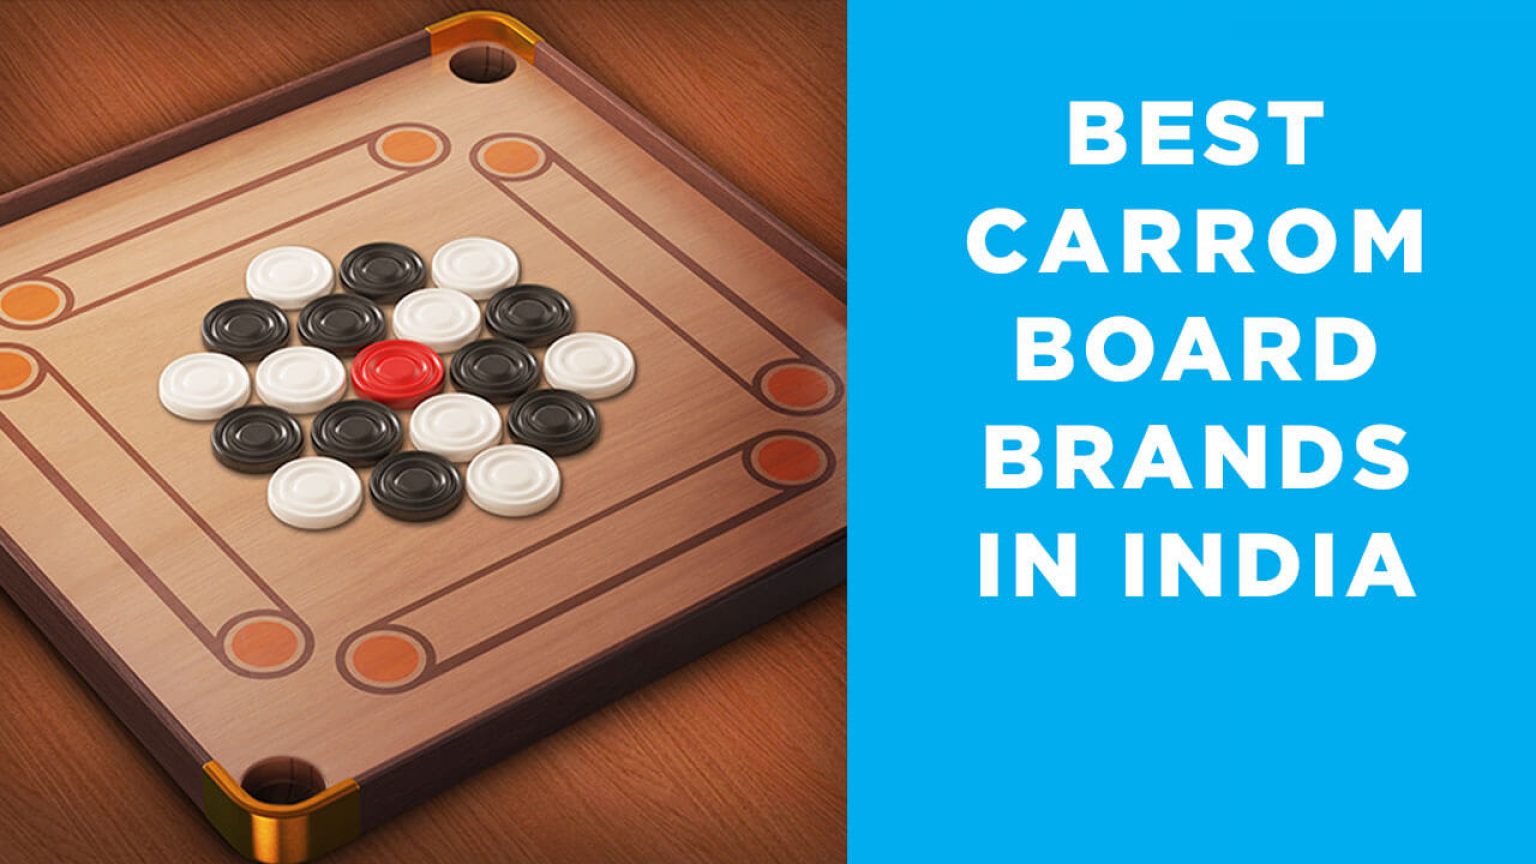 Top 10 Best Carrom Board Brands to buy in India (Experts